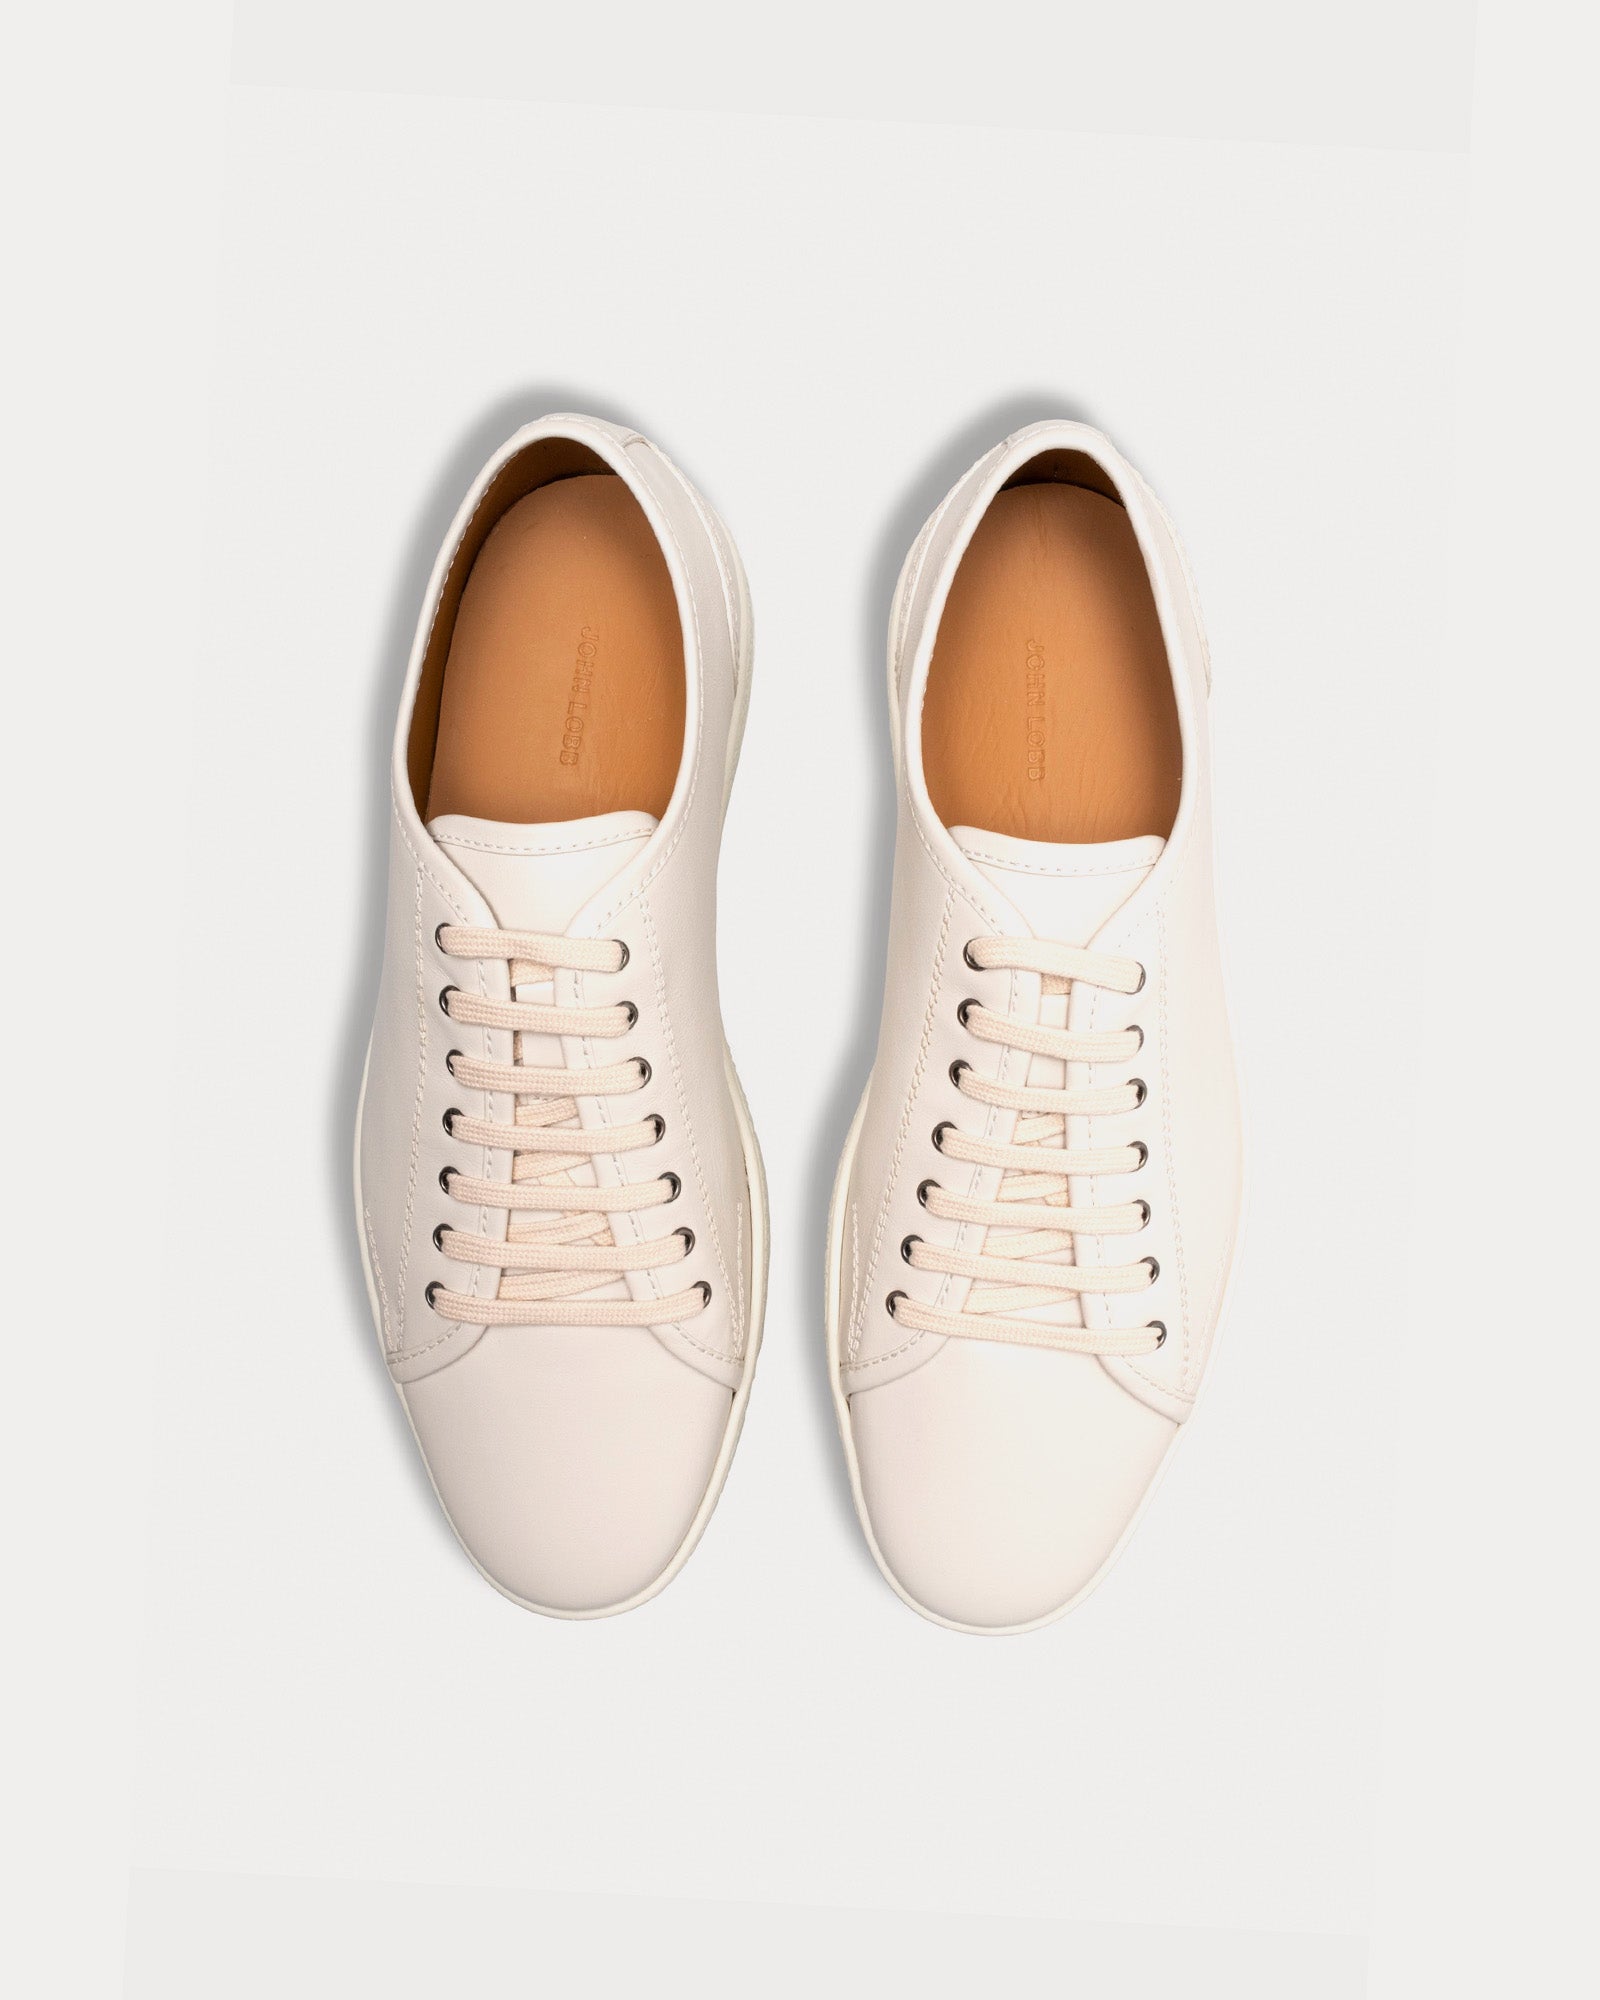 John Lobb - Stockwell Calf Leather White Low Top Sneakers